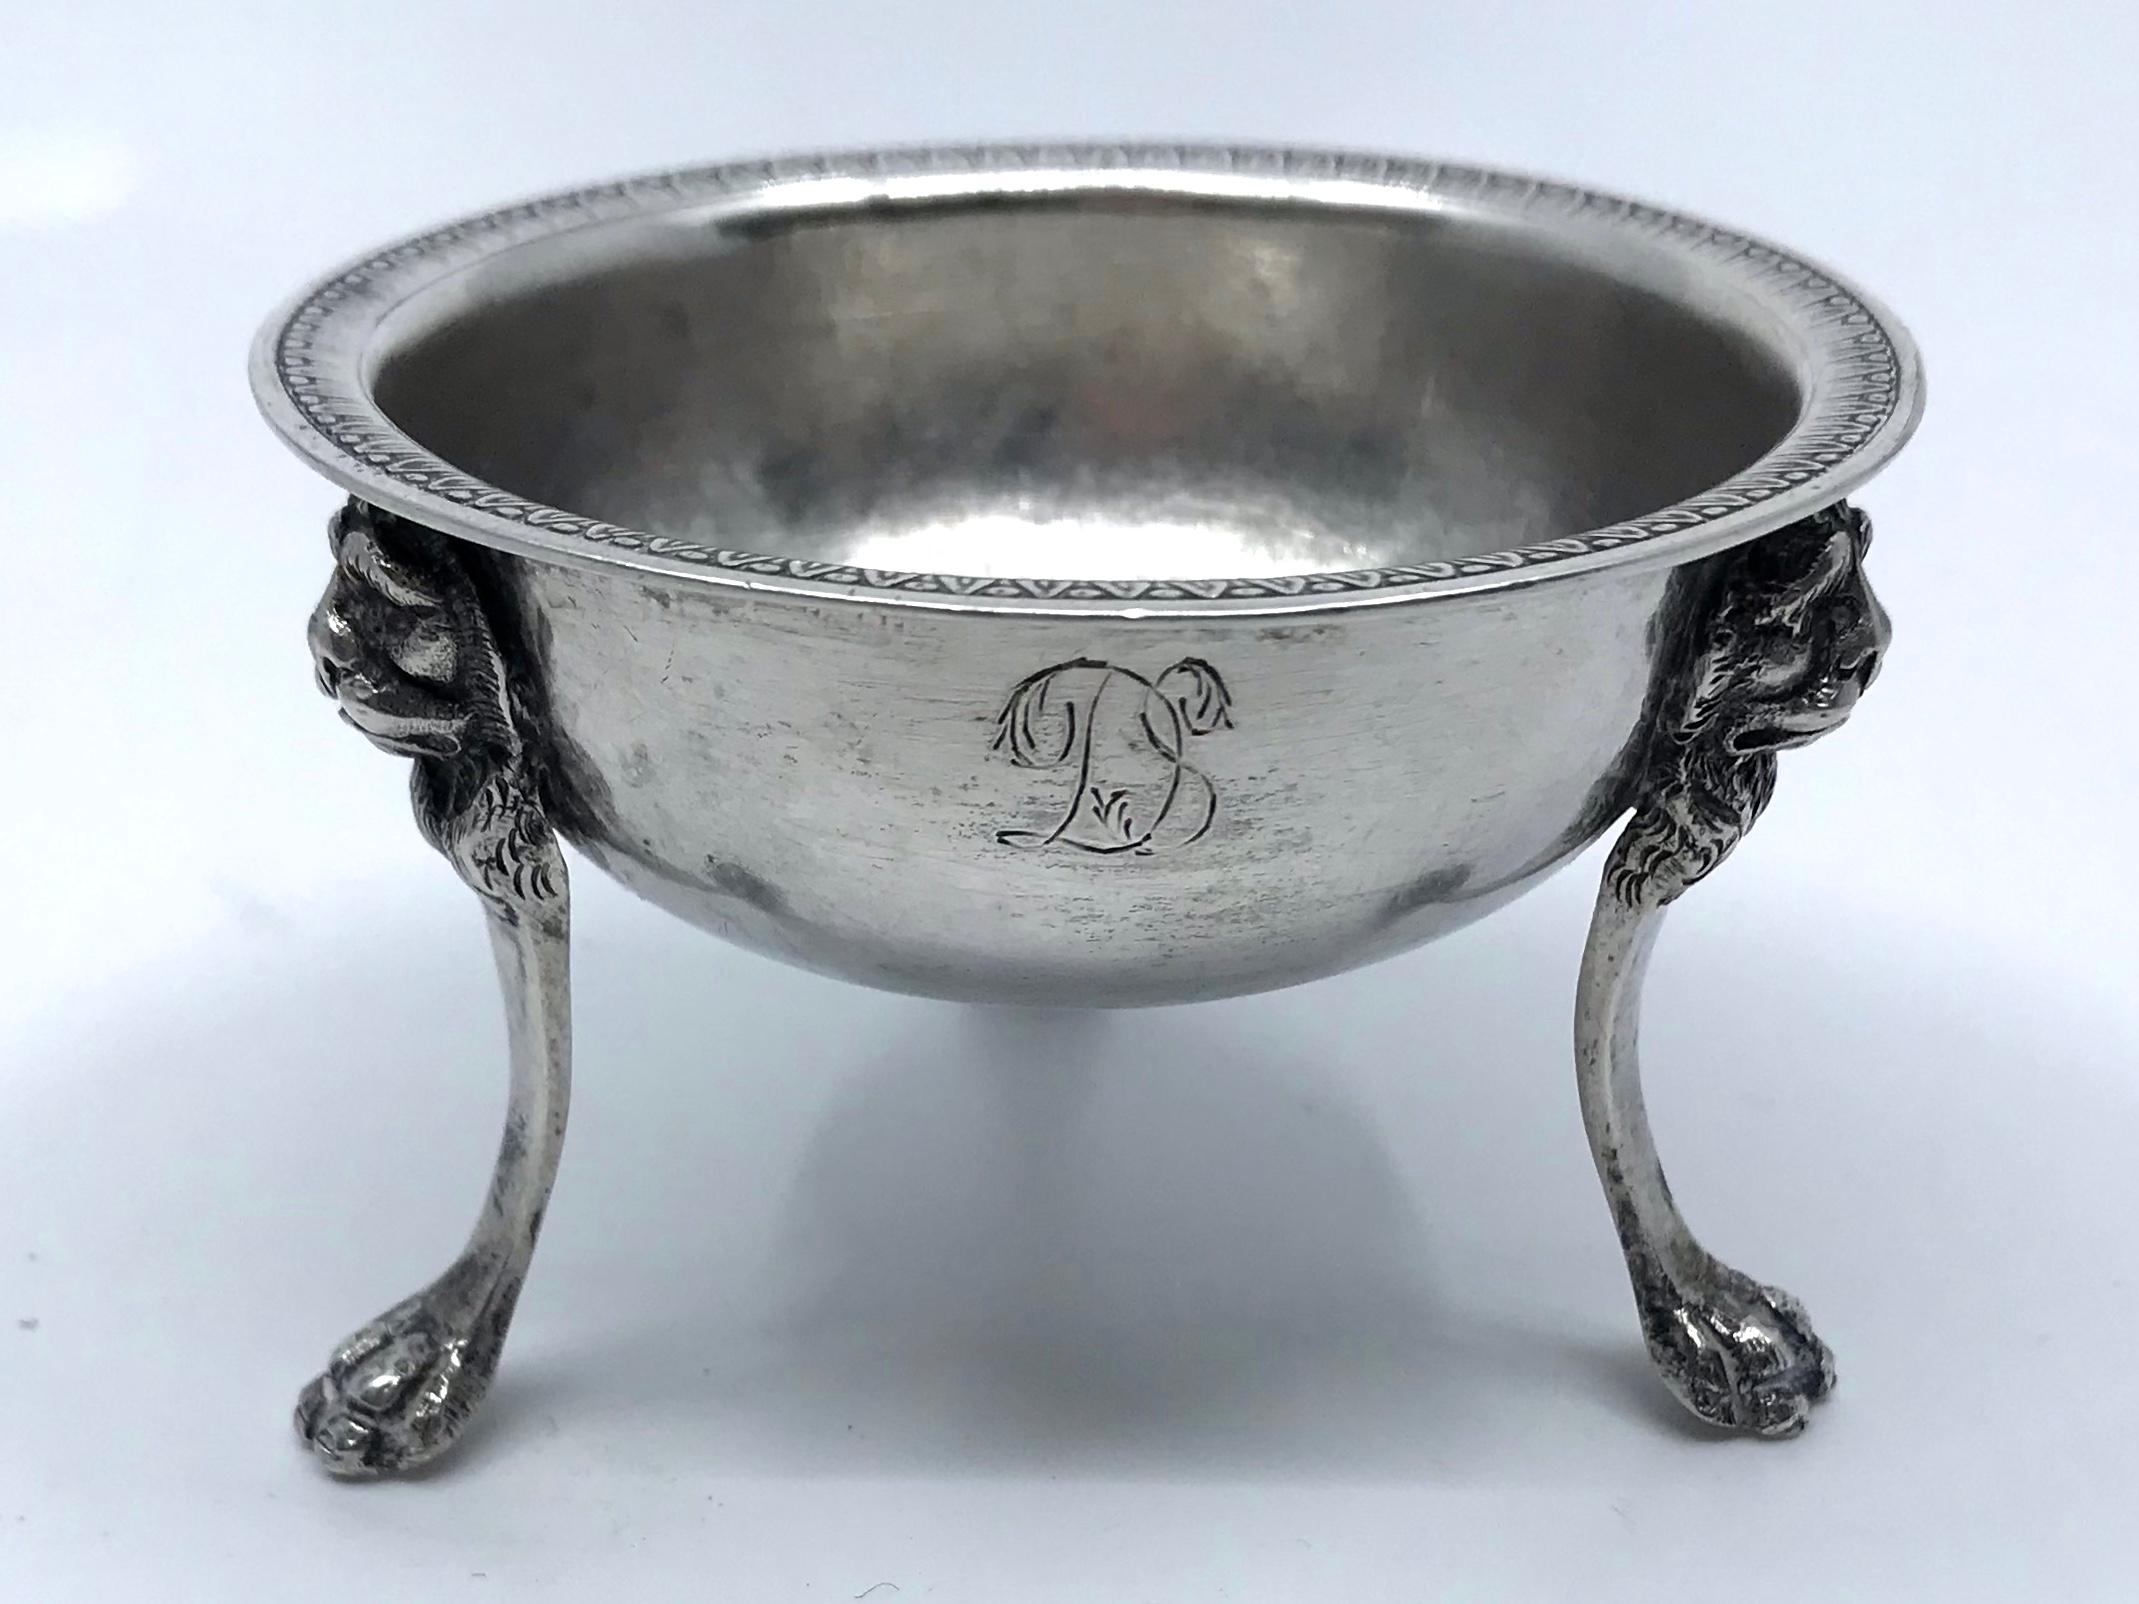 Sterling silver lions' head salt. Neapolitan silver salt / bud vase of circular form with reed and bead rim bordering silver bowl supported on tripartite base with lion head masks on incurving legs above paw feet. Engraved 